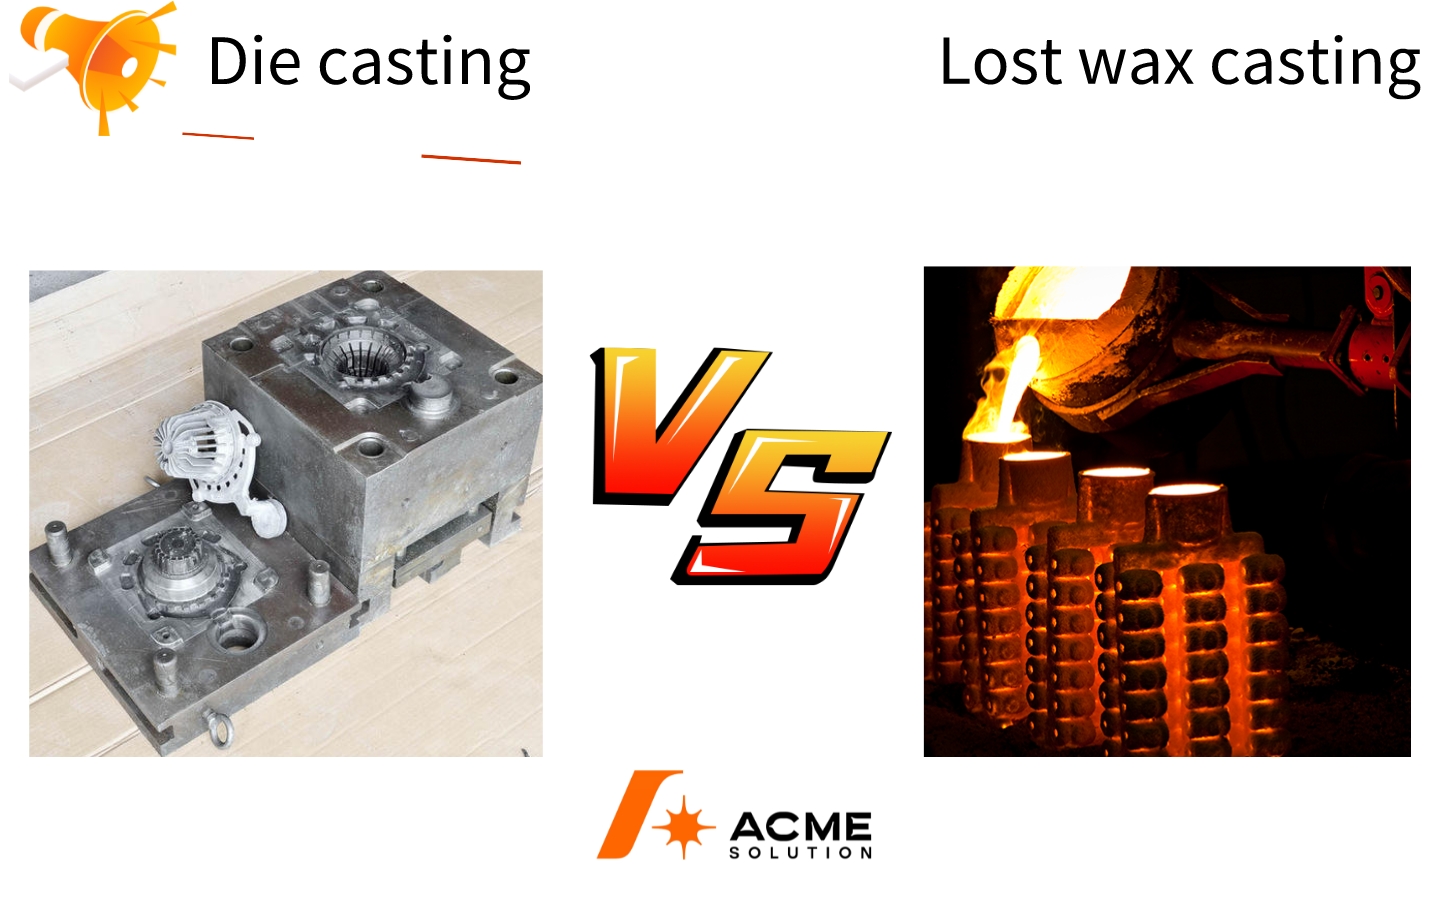 Difference between Die Casting and Lost-wax casting